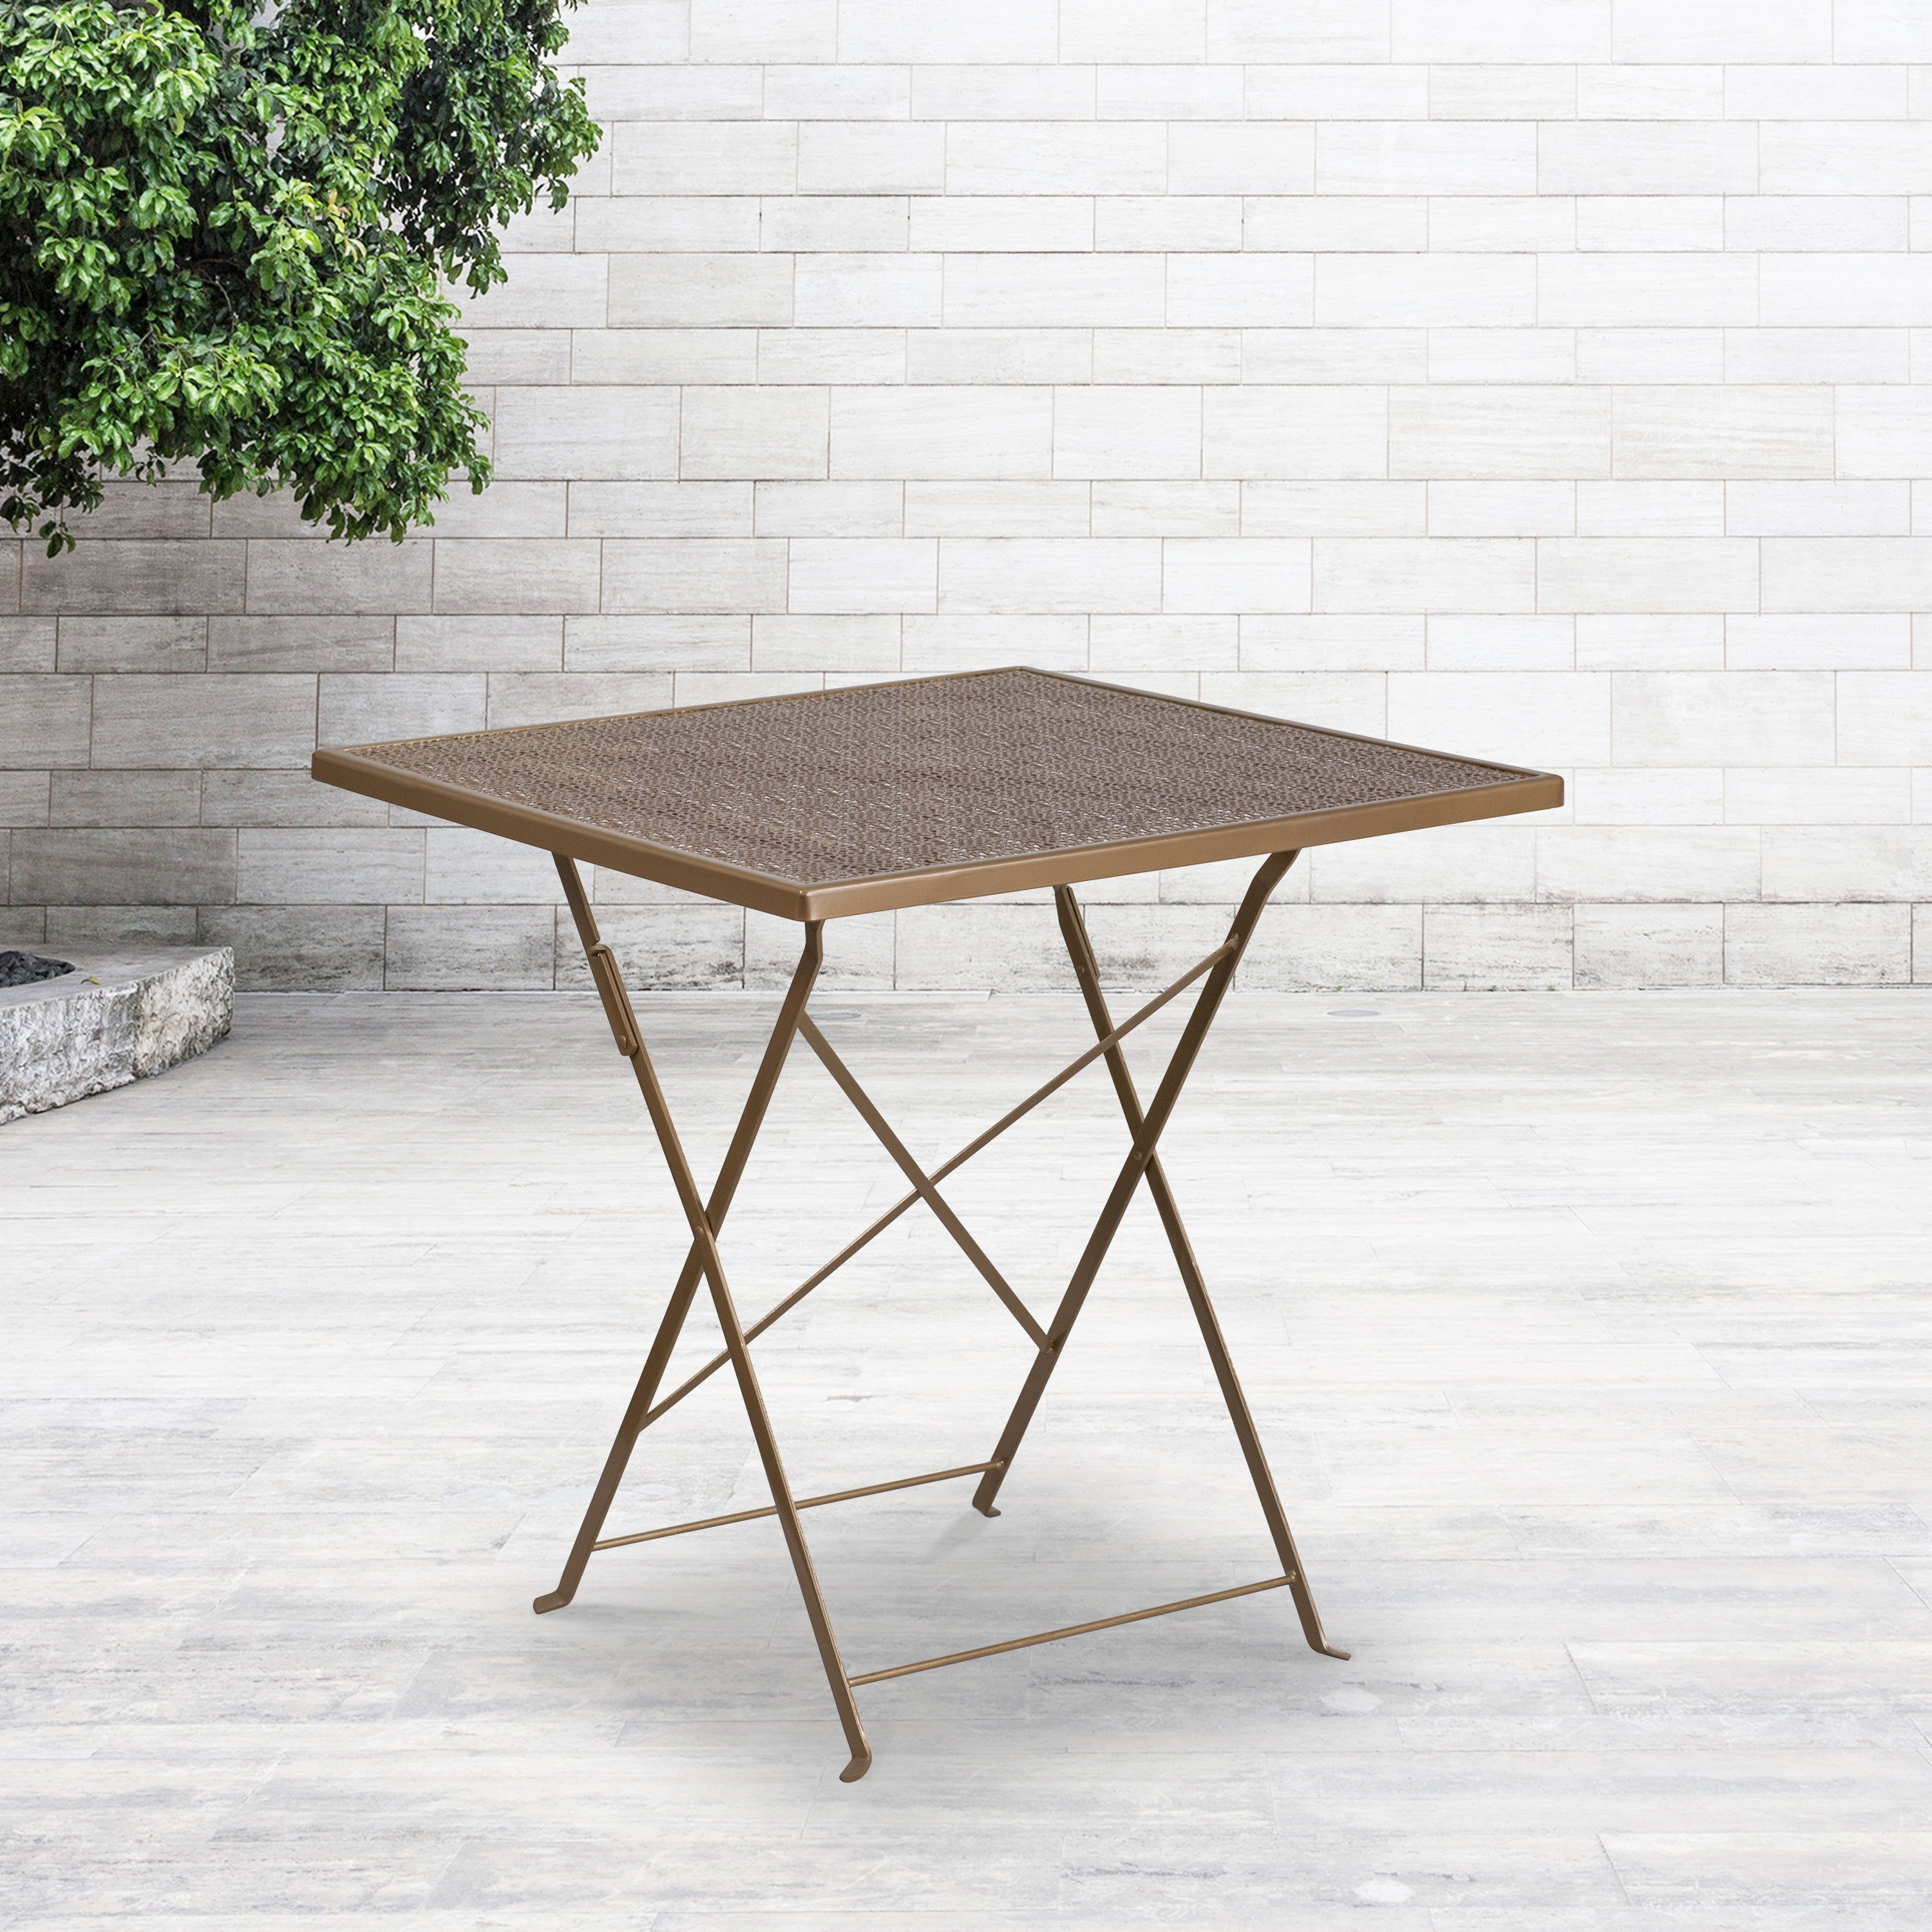 Details about   Flash Furniture 28'' Square Gold Indoor-Outdoor Steel Patio Table CO-5-GD-GG 